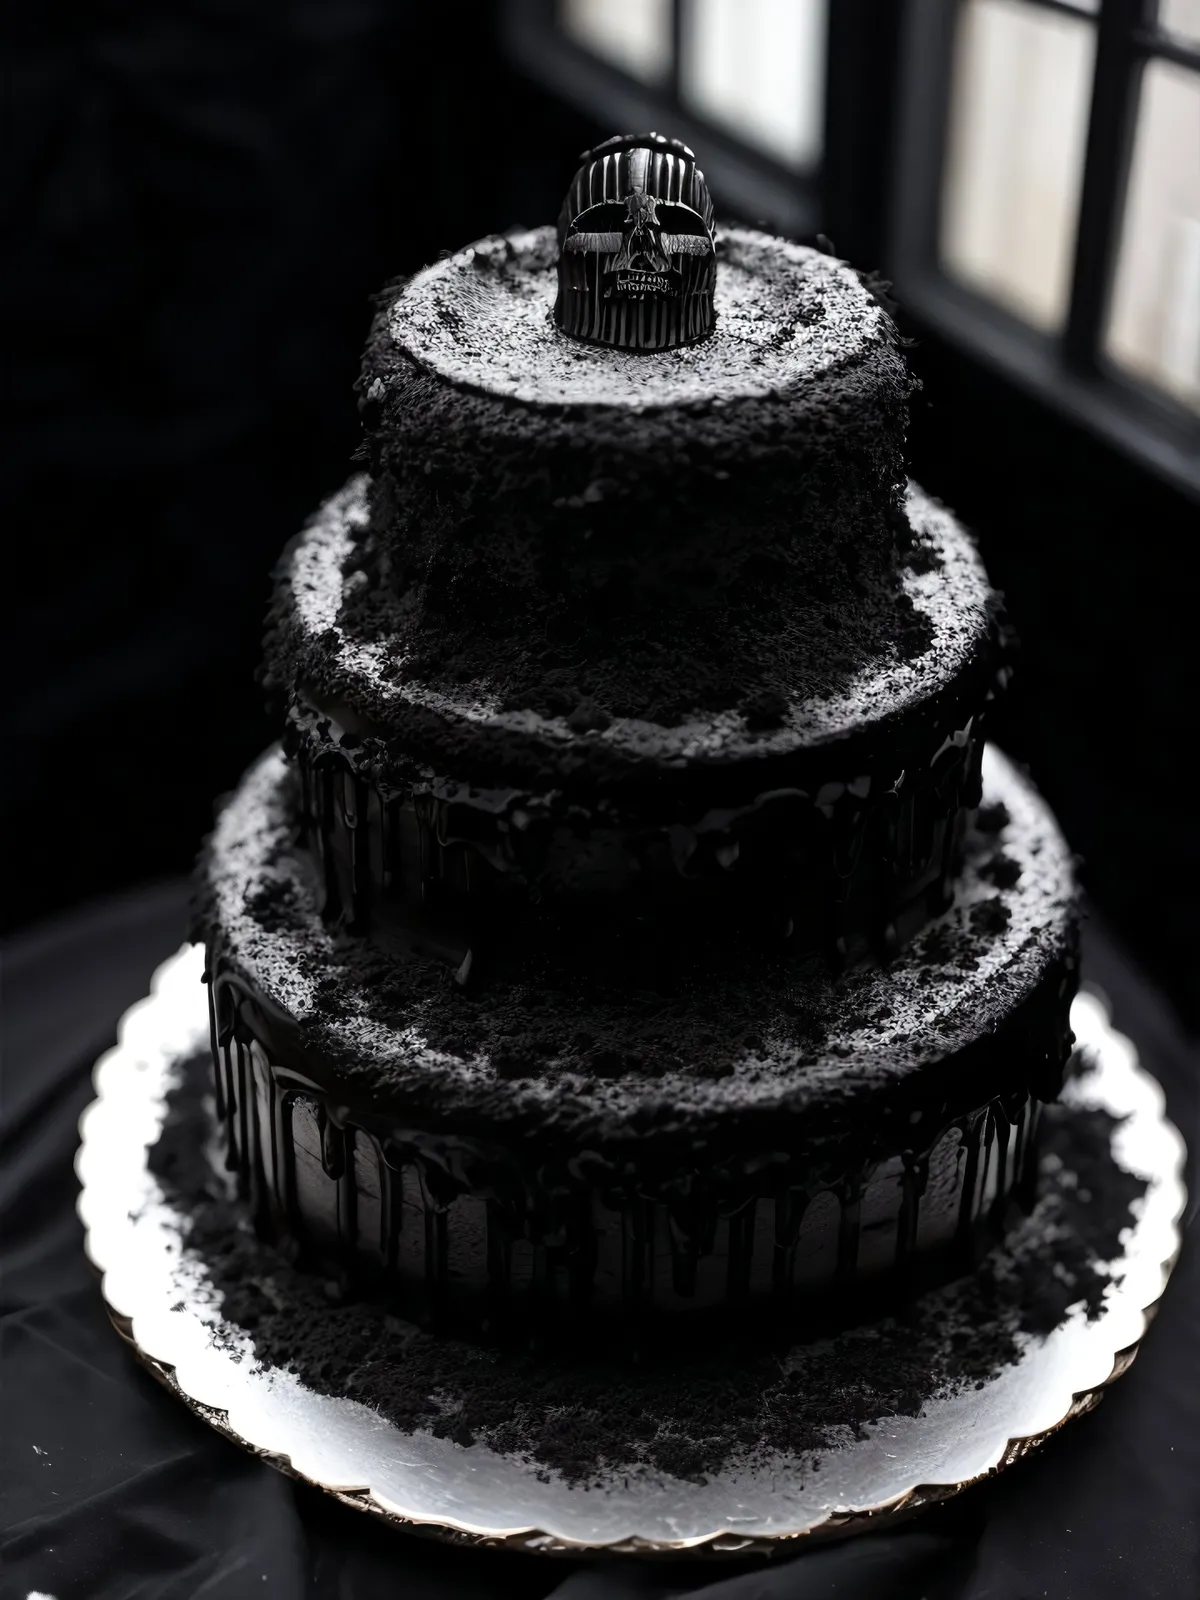 Picture of Delicious Chocolate Cake with Nut and Bolt Decoration